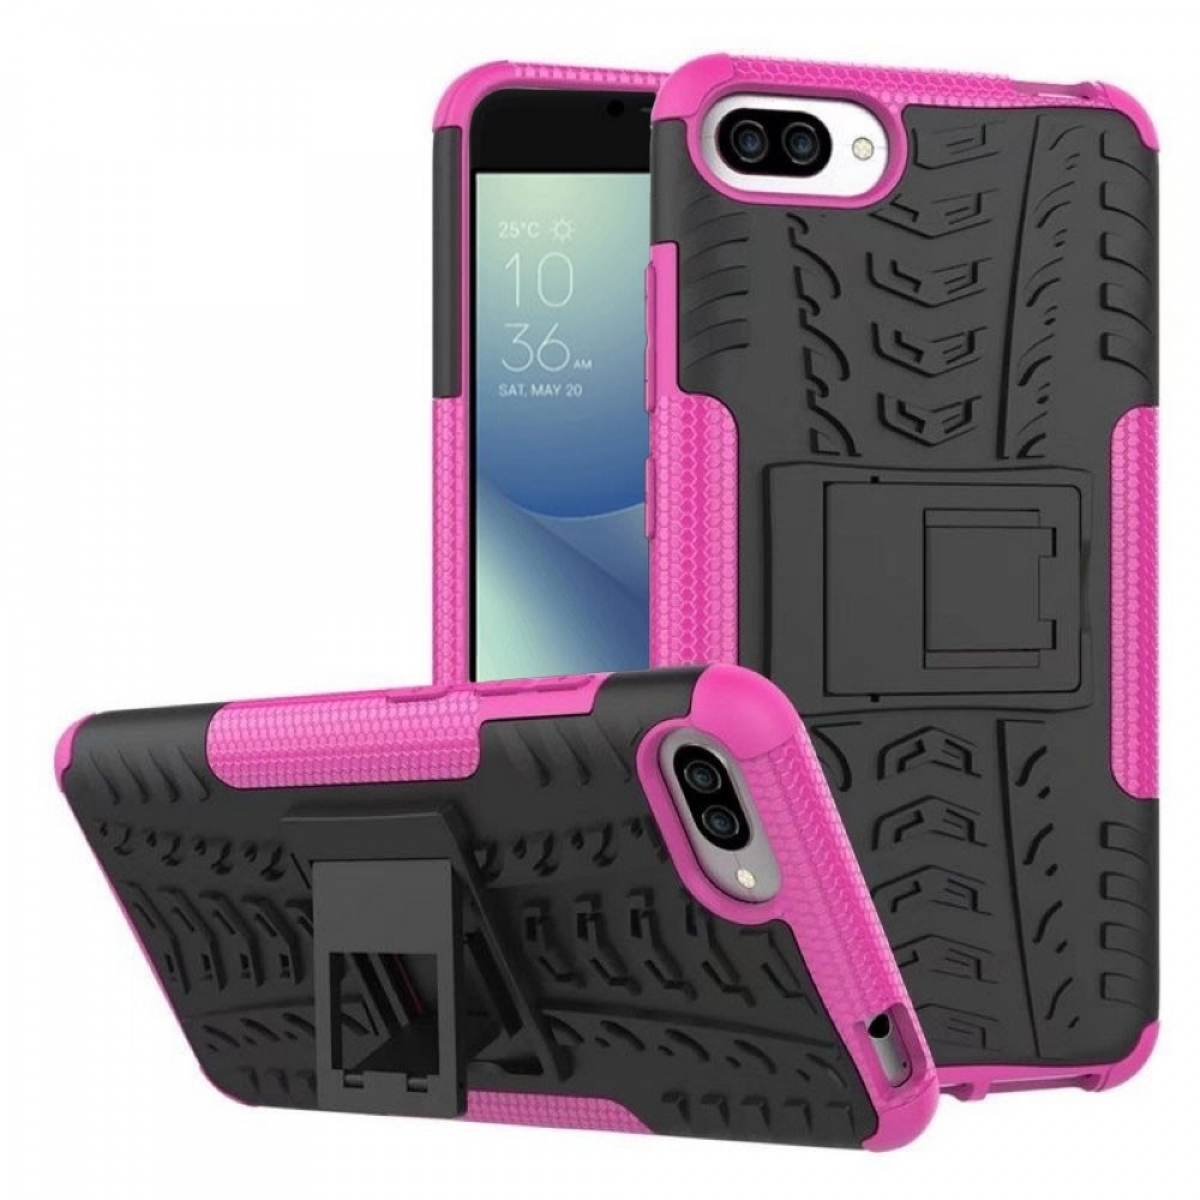 CASEONLINE 2i1, Backcover, Pink Asus, Max, 4 Zenfone